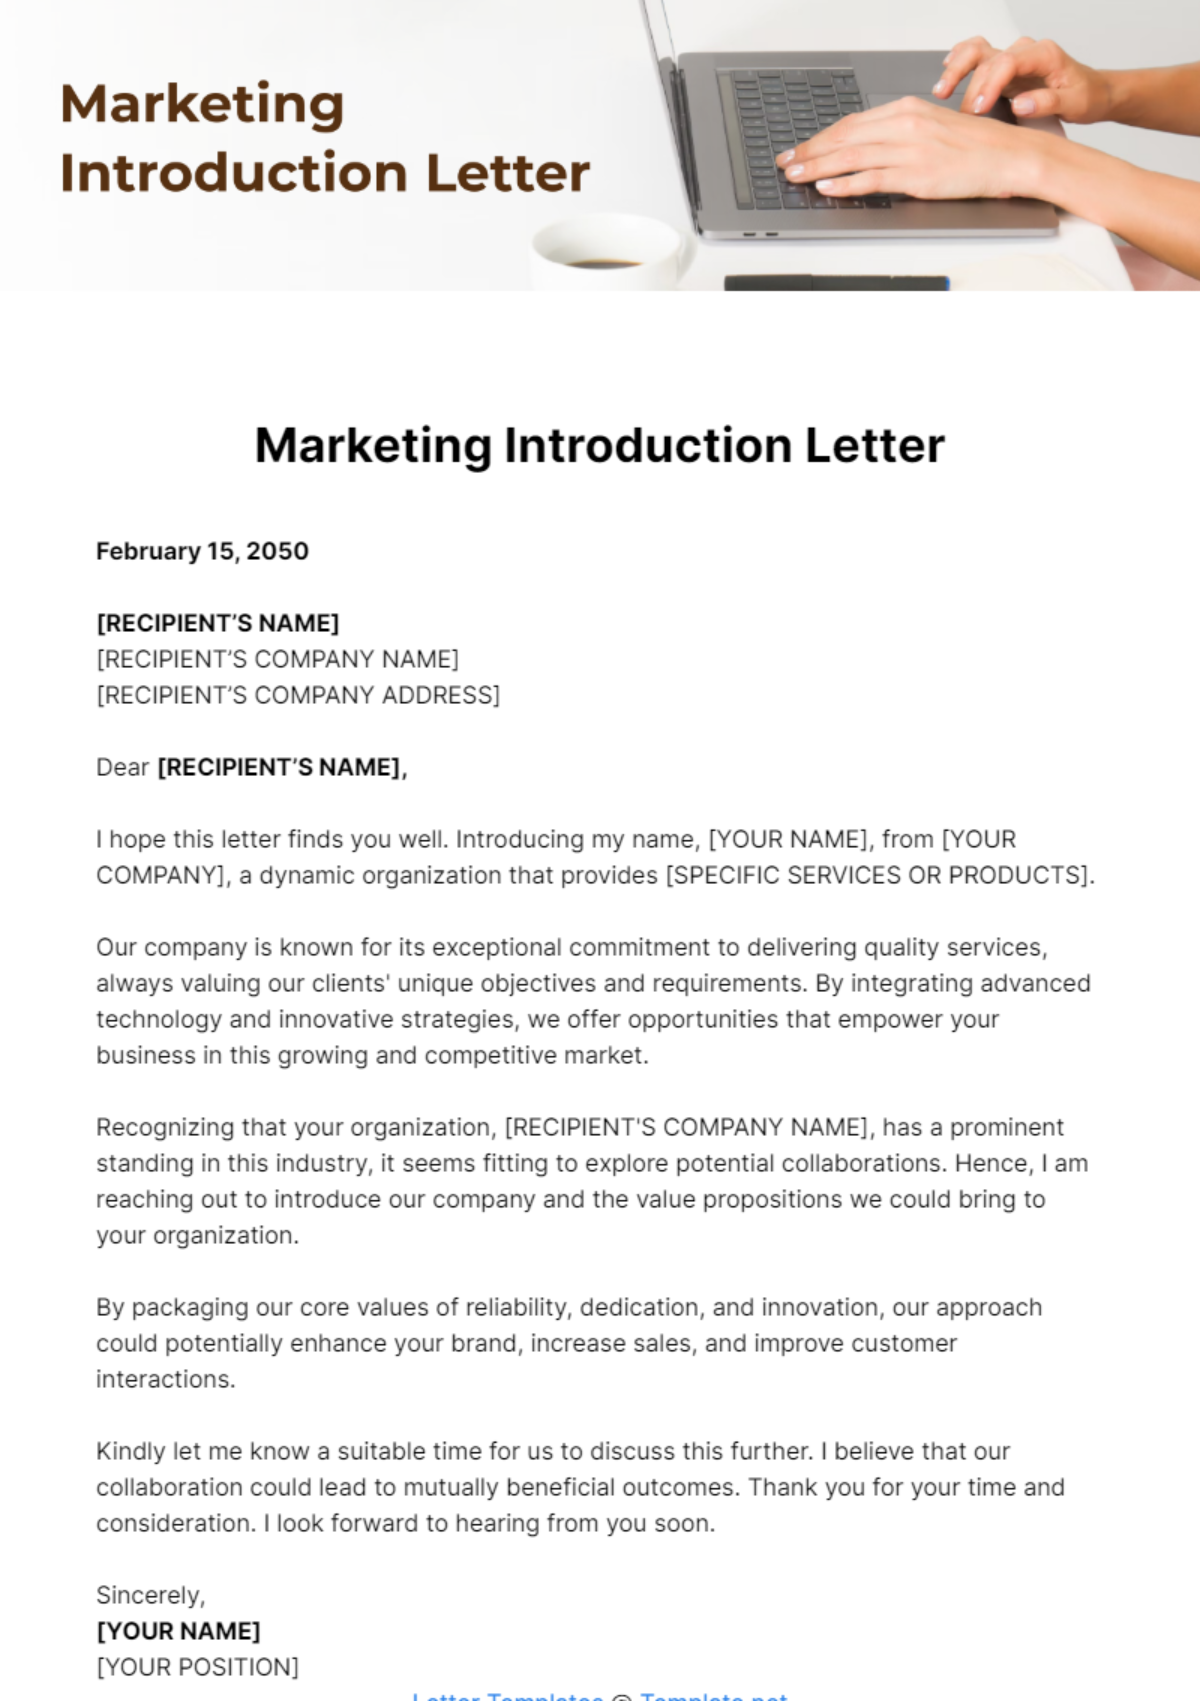 Marketing Introduction Letter Template